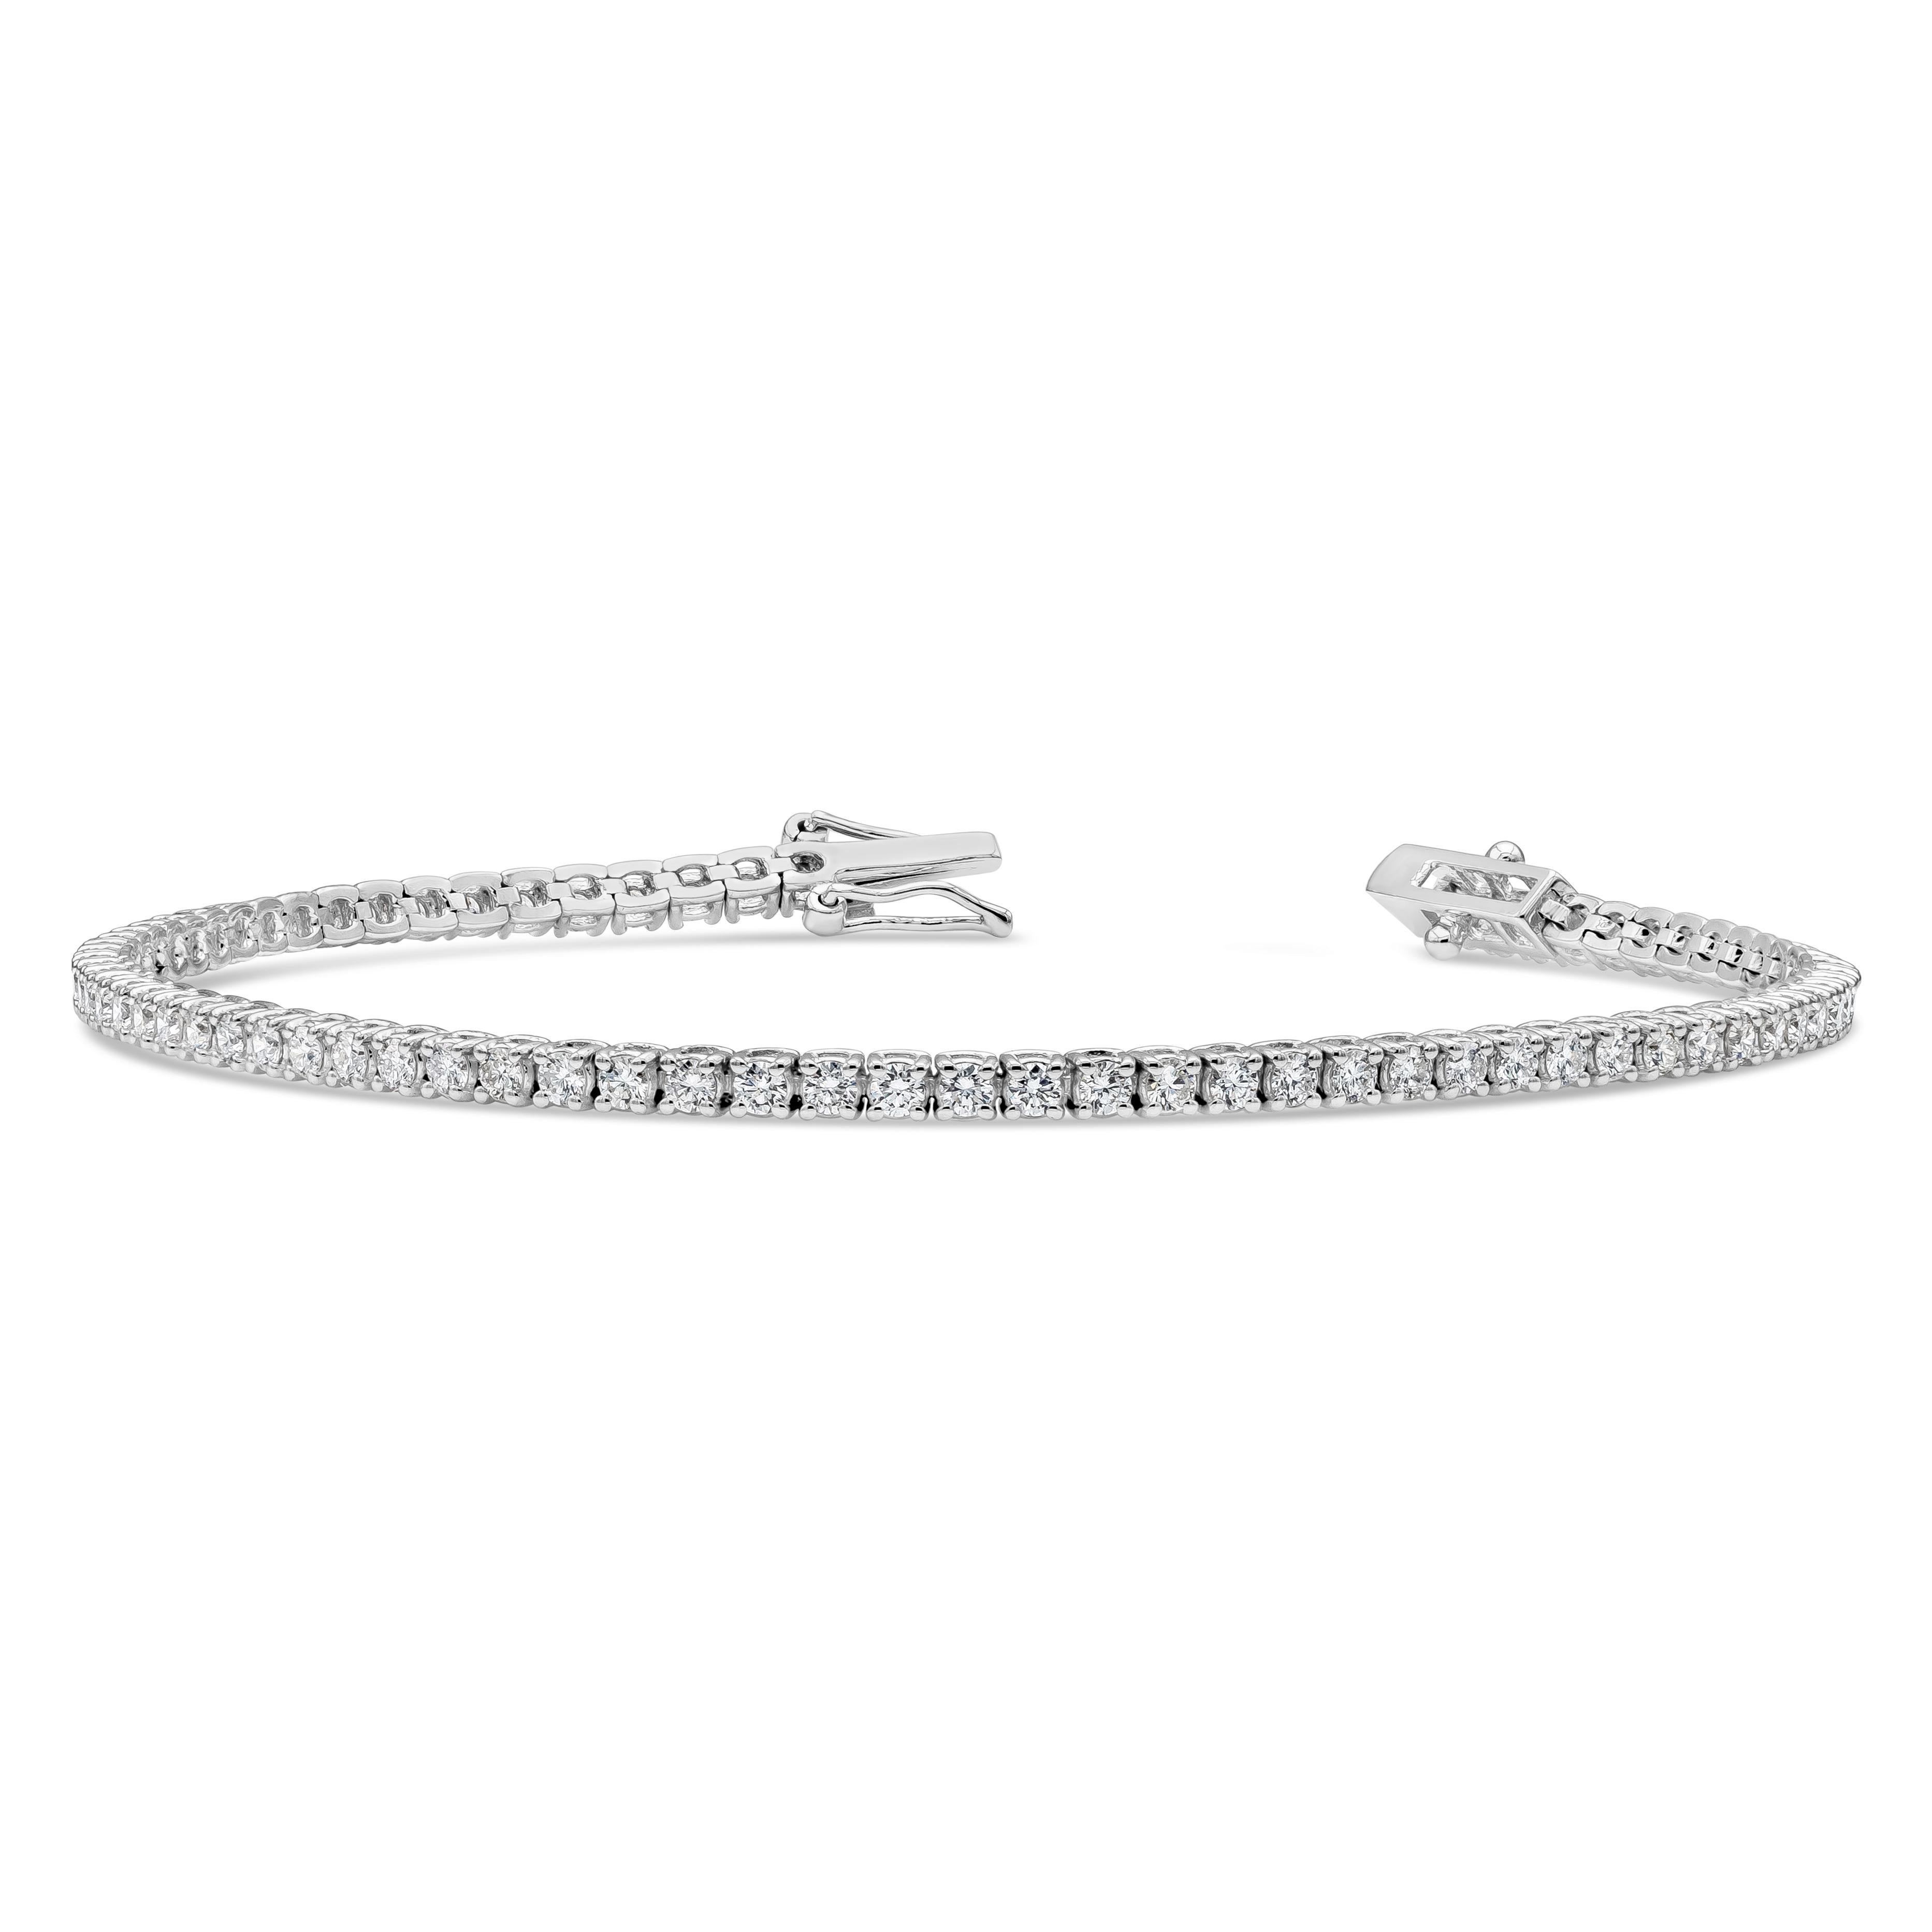 A classic tennis bracelet style showcasing 75 round brilliant diamonds weighing 2.06 carats total, F color and VS-SI in clarity. 7 inches in length. Made with 18K White Gold

Roman Malakov is a custom house, specializing in creating anything you can